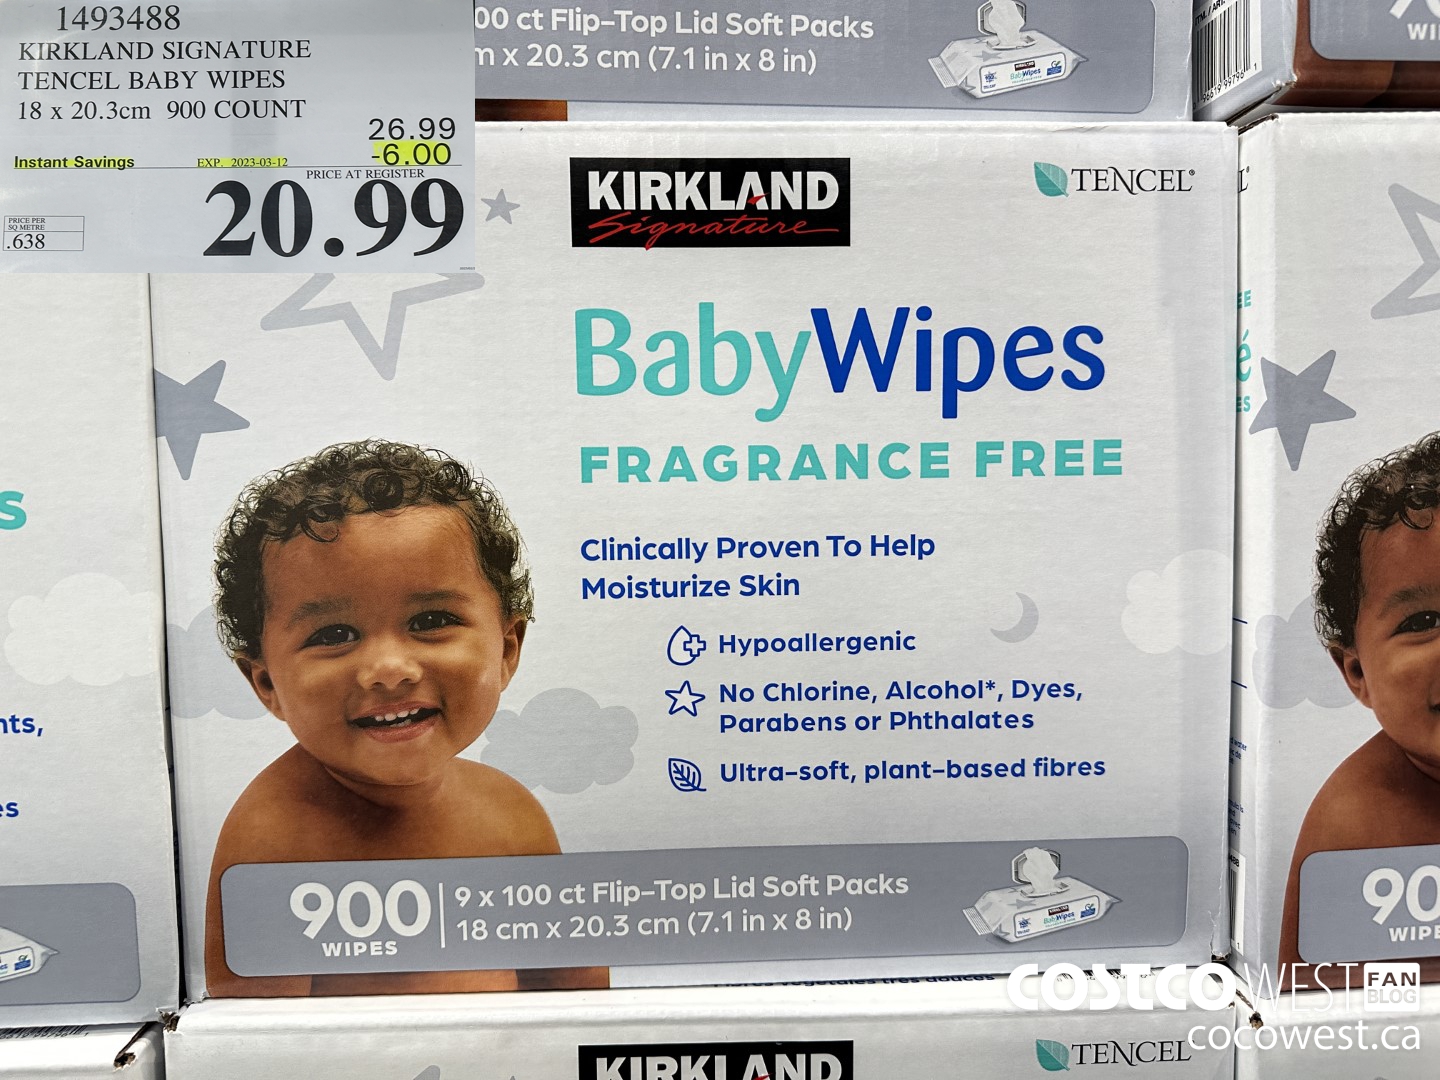 1126126 HUGGIES PULL UPS PLUS BOYS OR GIRLS 4T 5T PACK OF 102 9 50 INSTANT  SAVINGS EXPIRES ON 2022 02 27 36 49 - Costco East Fan Blog